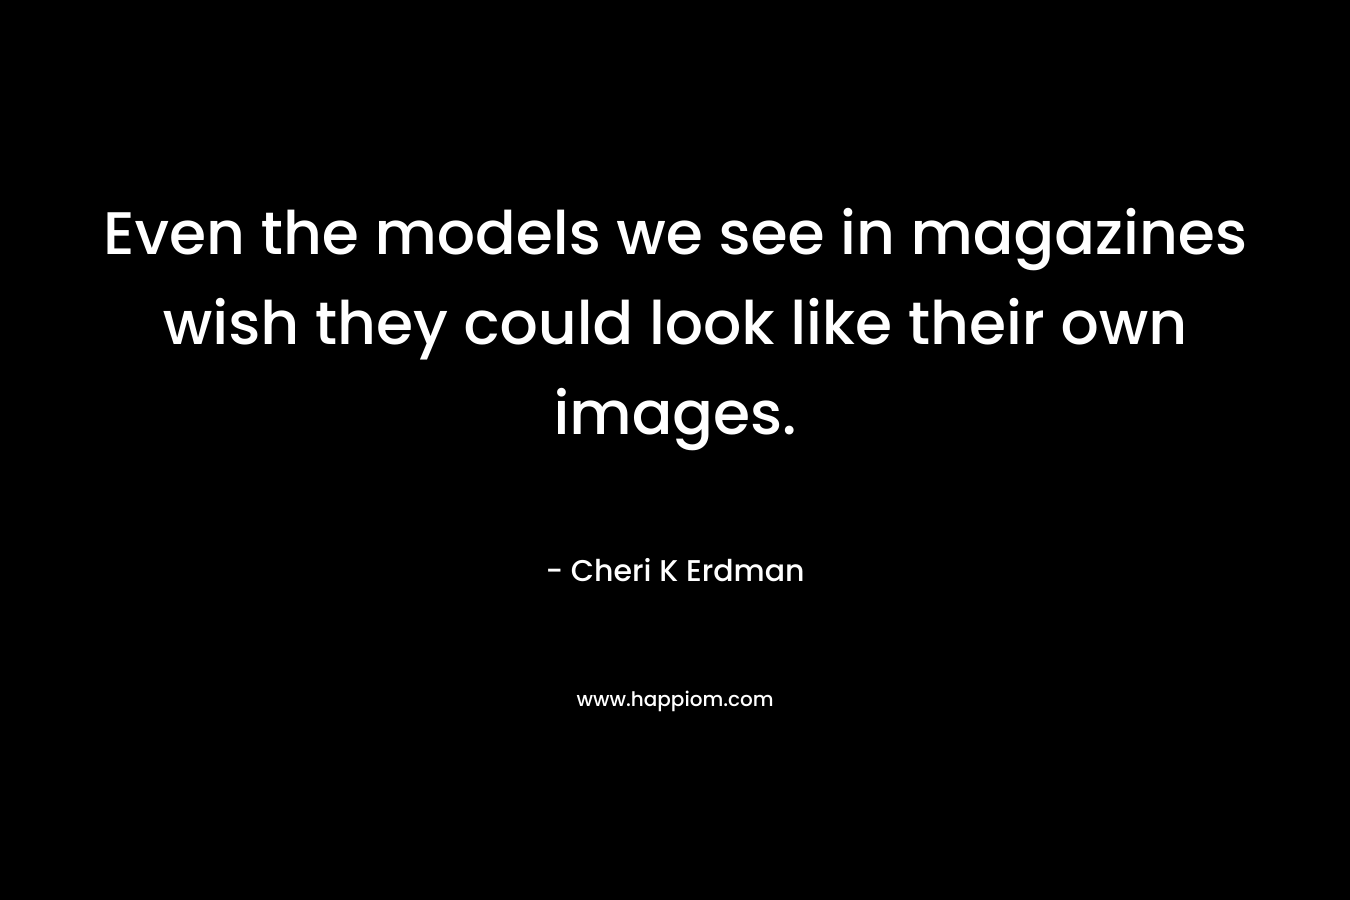 Even the models we see in magazines wish they could look like their own images. – Cheri K Erdman